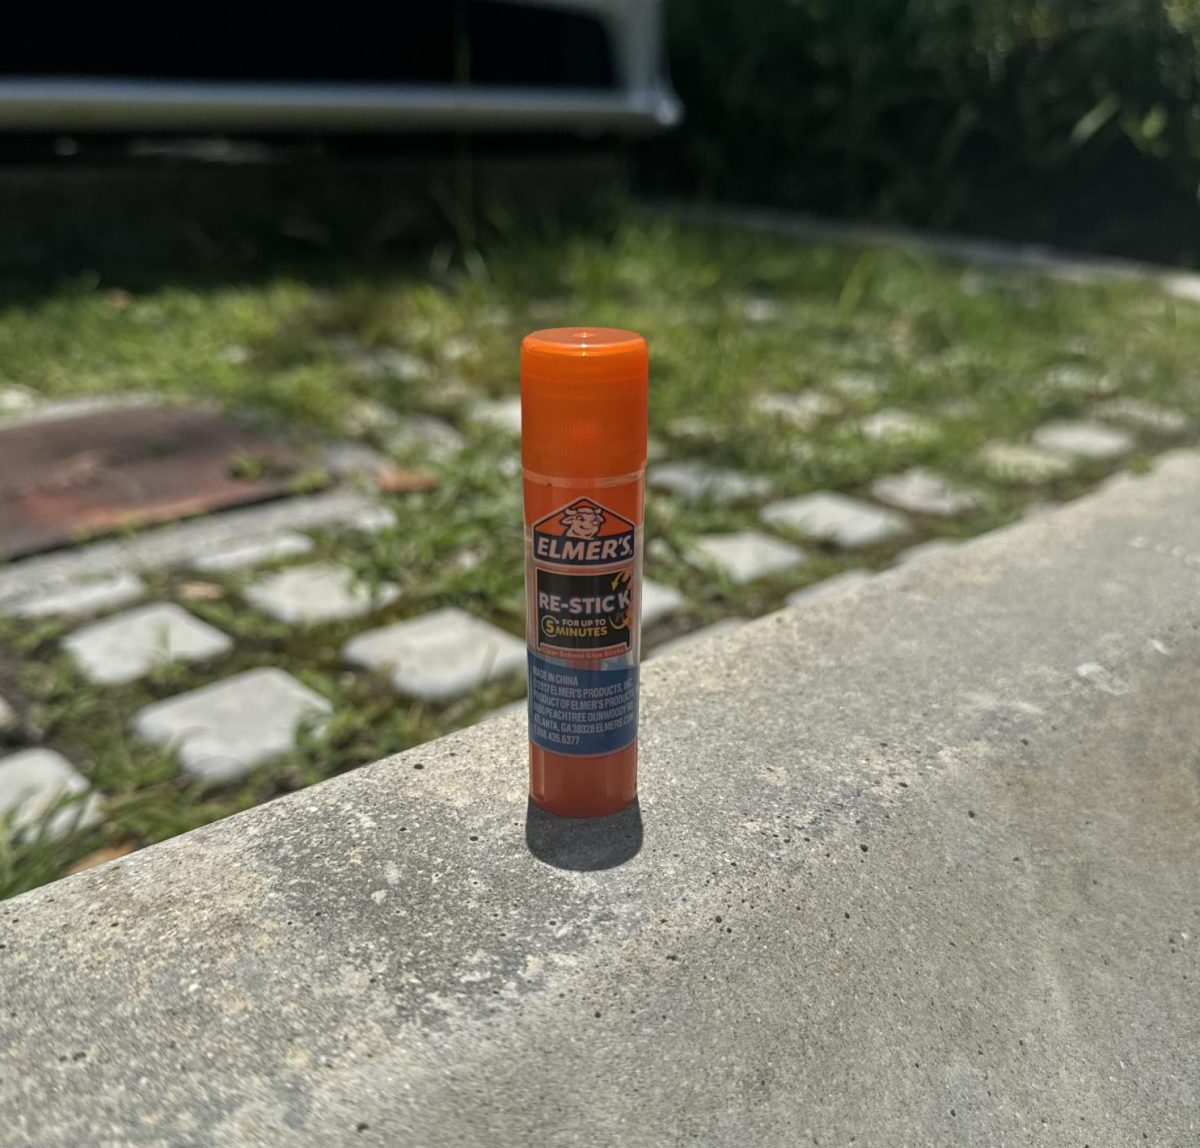 An Elmer’s glue stick rests on a ledge in it natural habitat, a school campus.